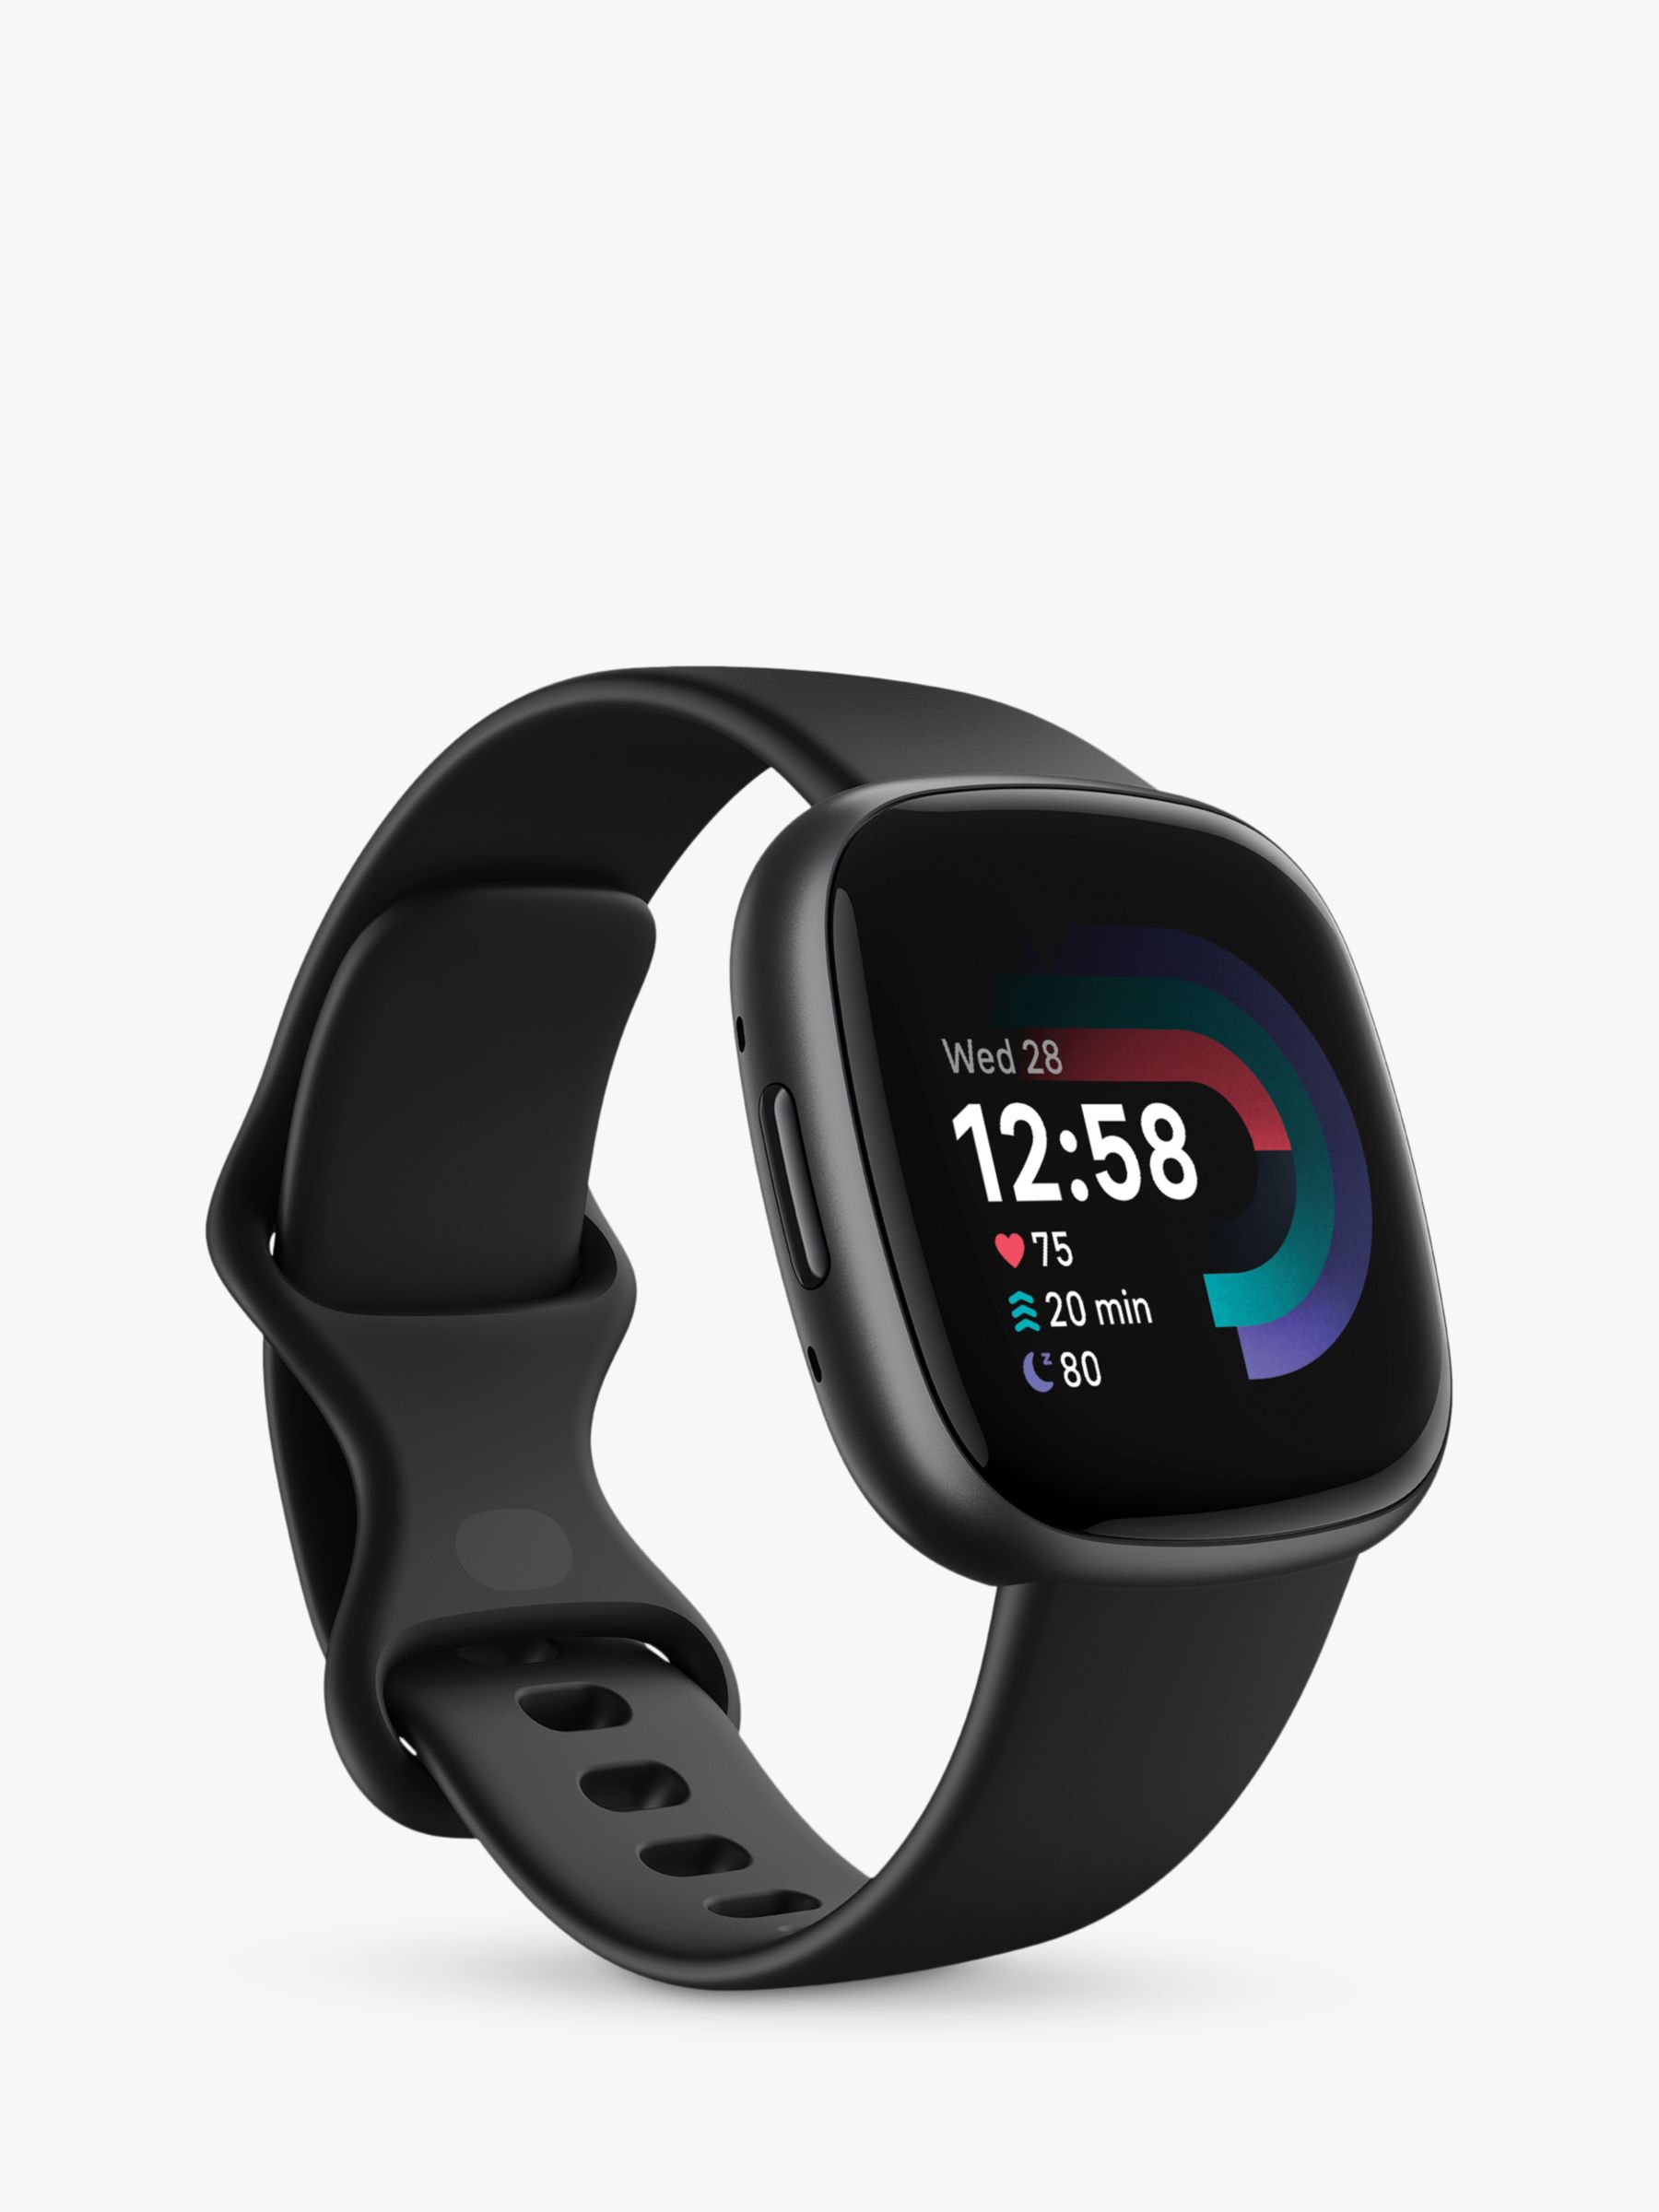 Fitbit Versa 4 Health & Fitness Smartwatch with Heart Rate Monitor ...